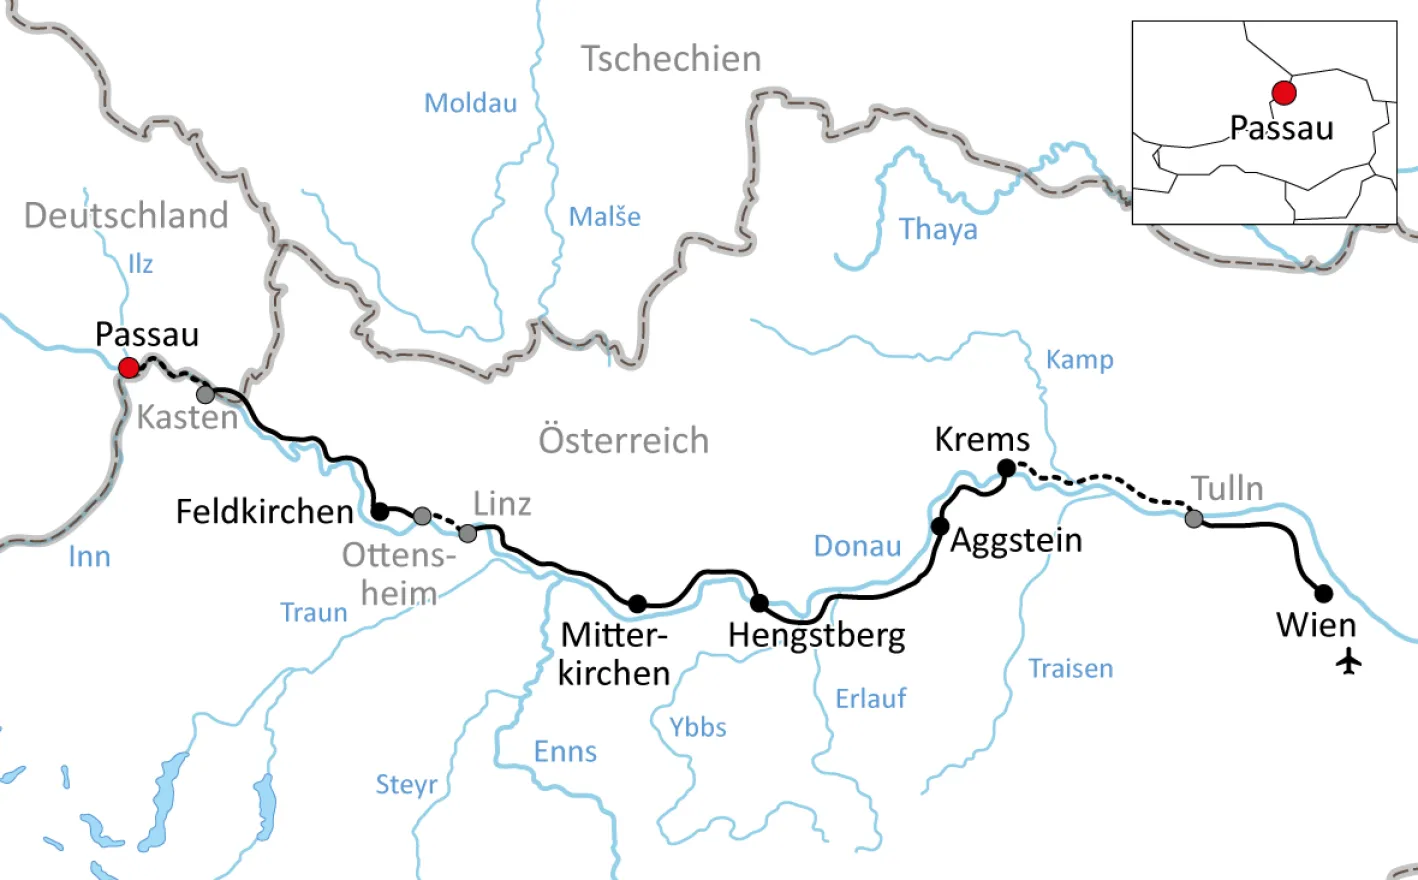 Map for the family cycling vacation along the Austrian Danube